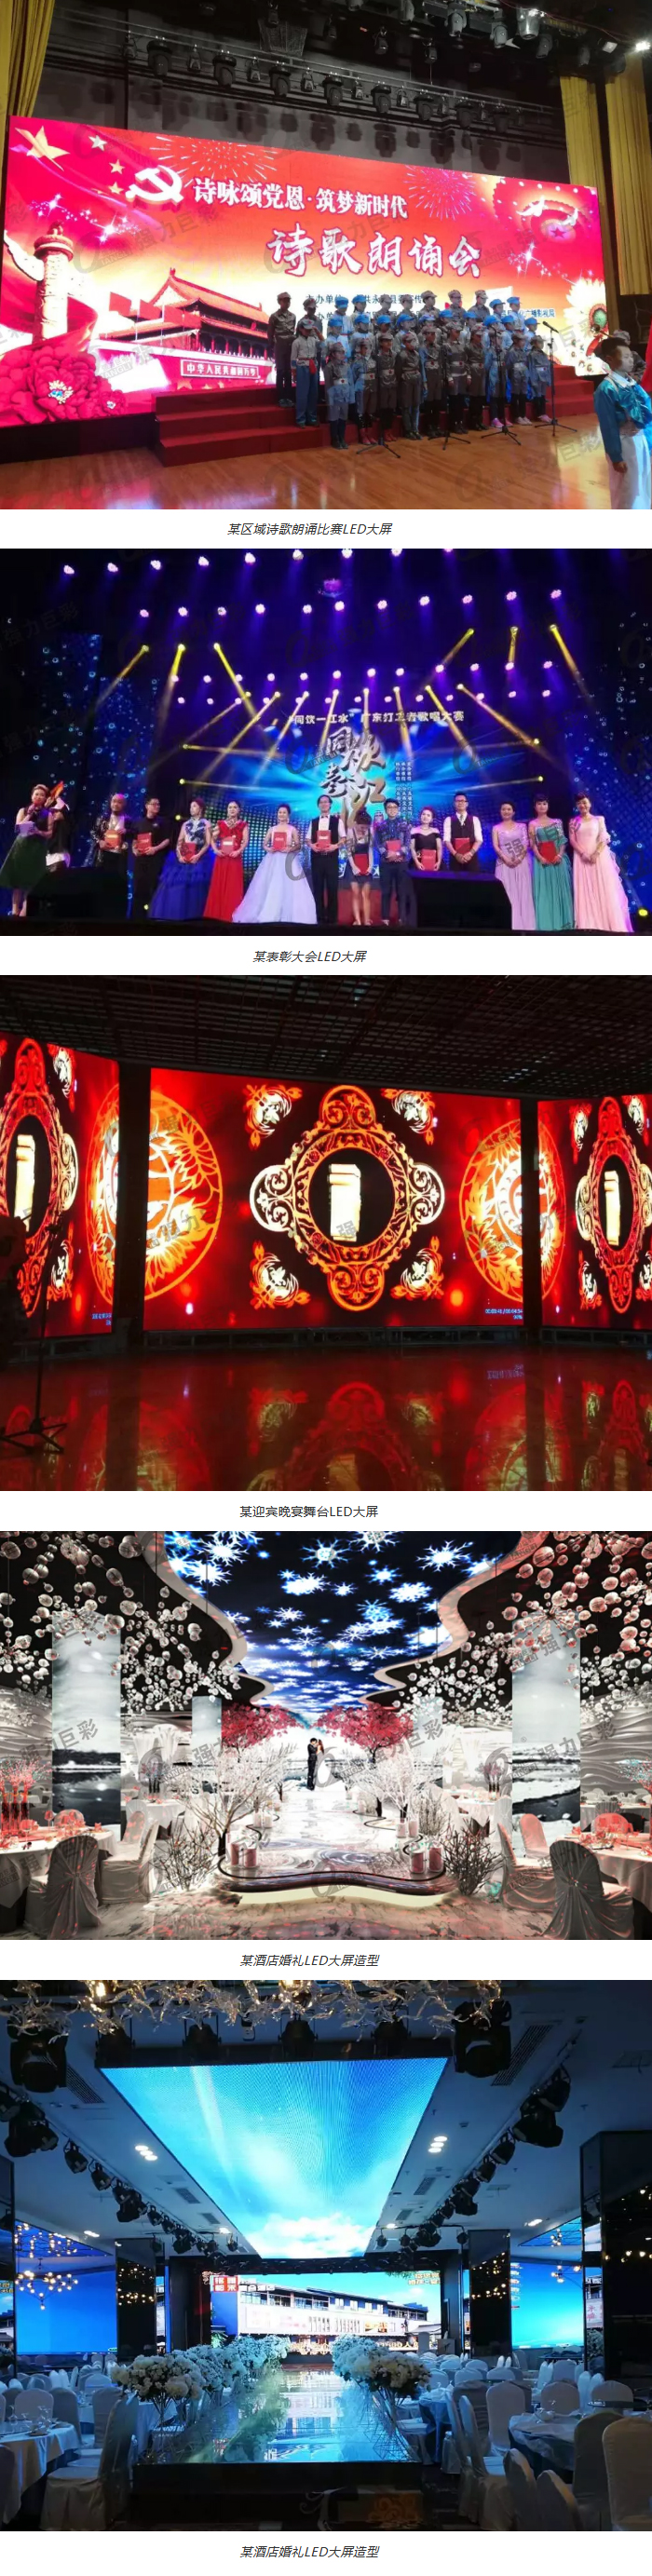 Indoor rental led screen powers all kinds of events